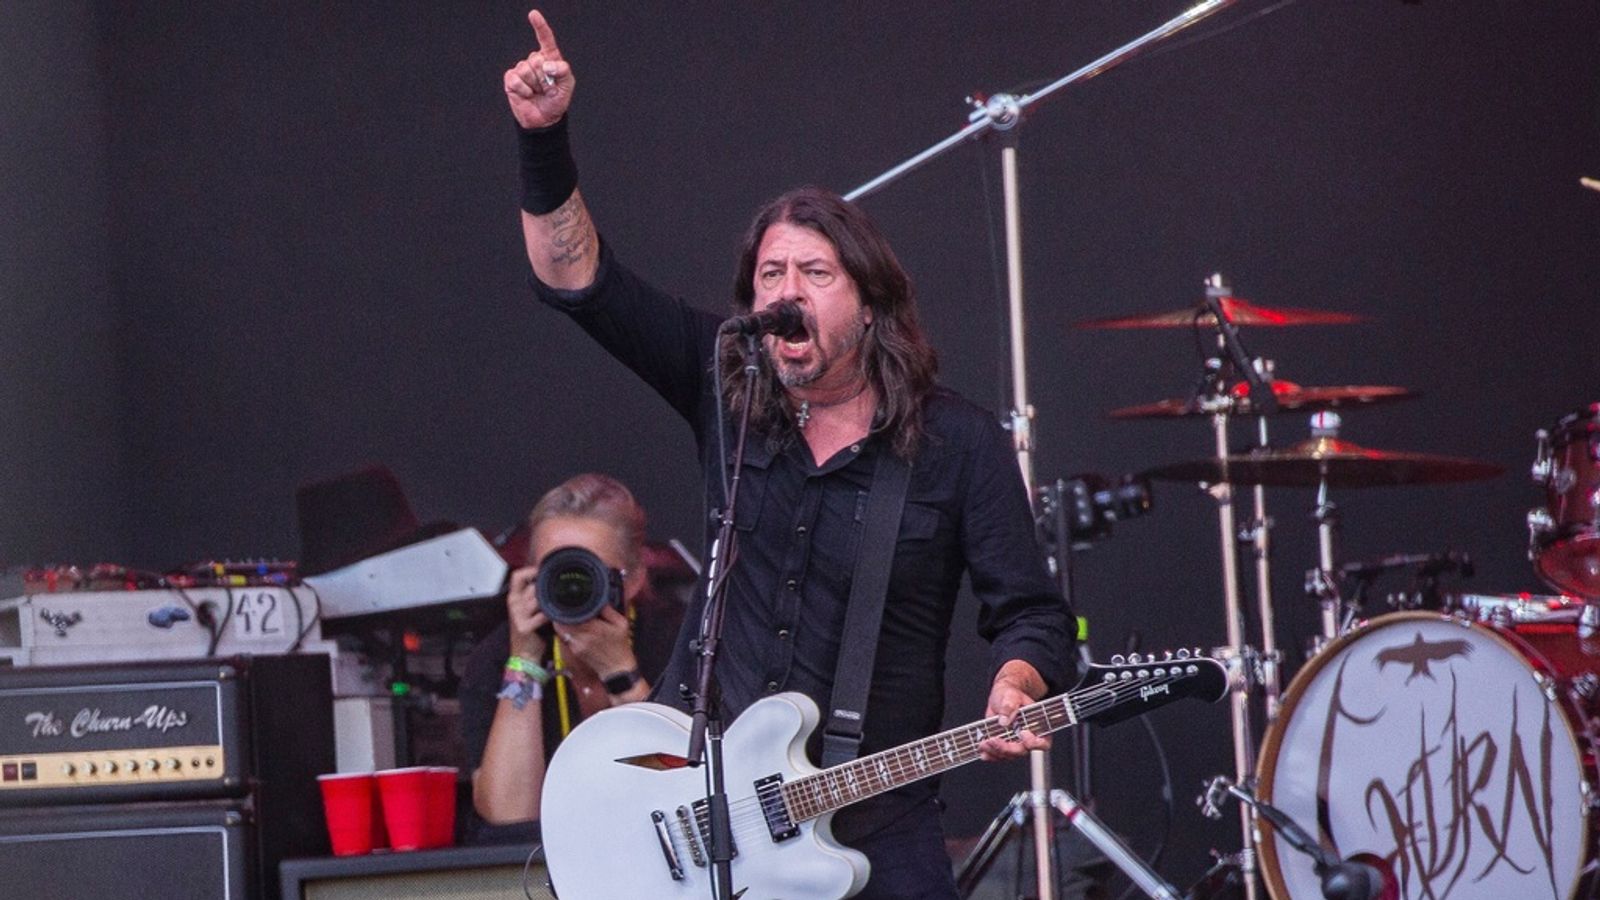 Glastonbury: Foo Fighters will be a hard act to beat after their unexpected festival performance